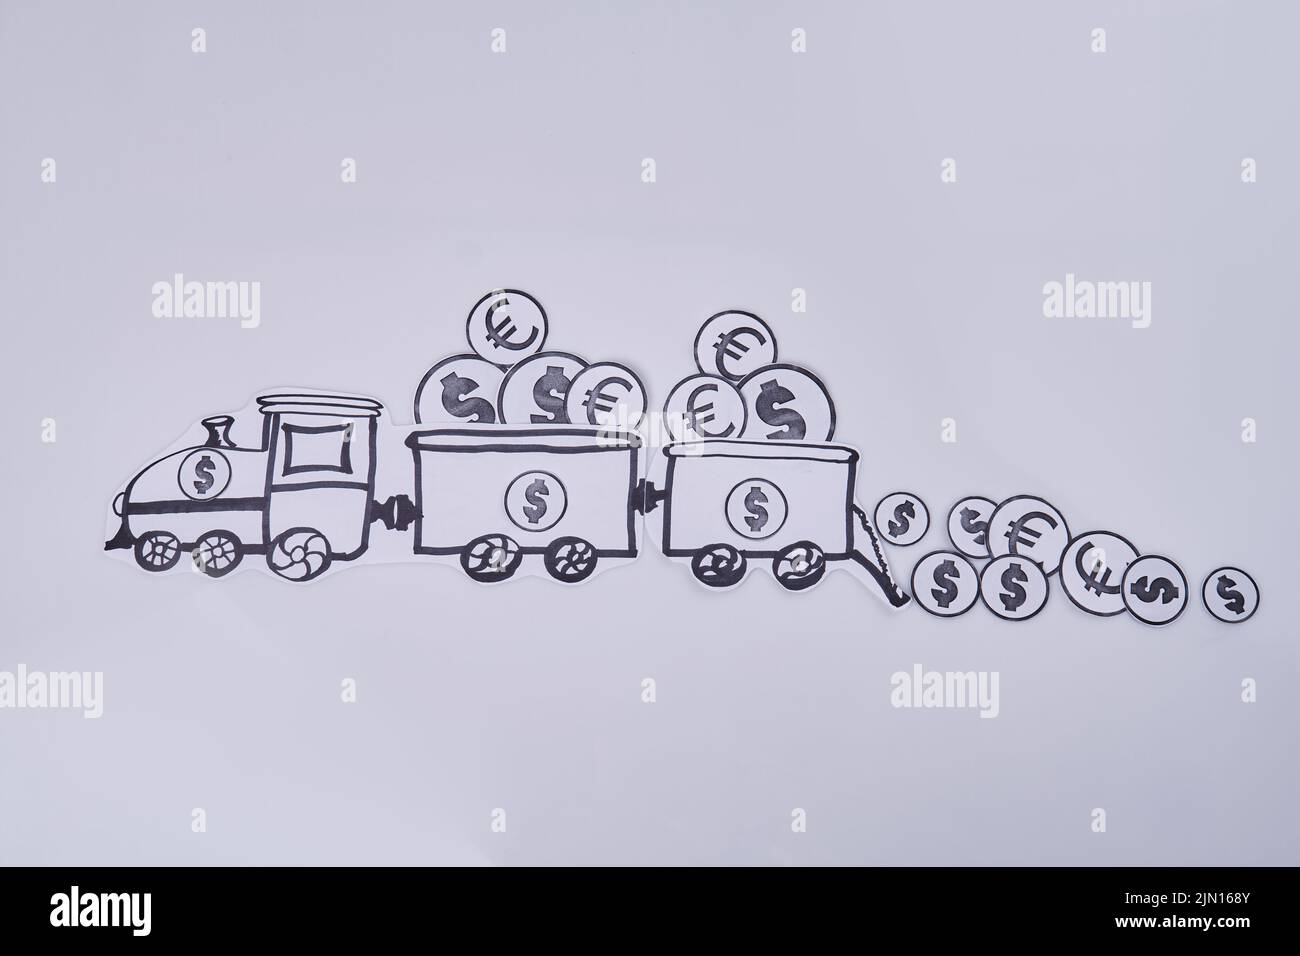 Sketch of train with dollar and euro signs. Locomotive with wagons on white background. Stock Photo